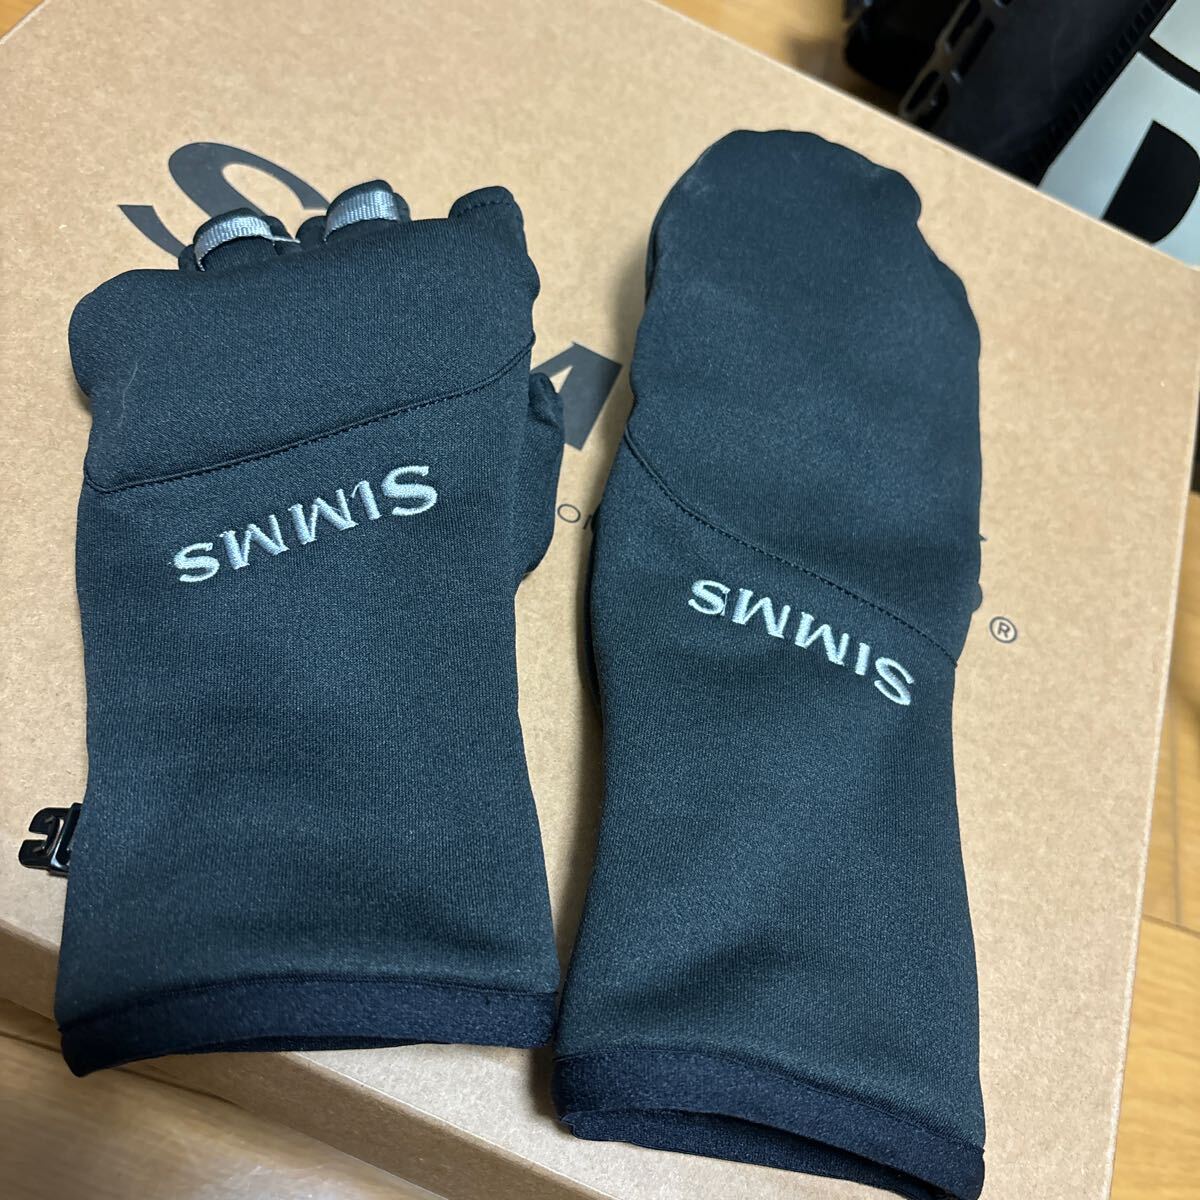  Syms simms FS Hold over mitoS